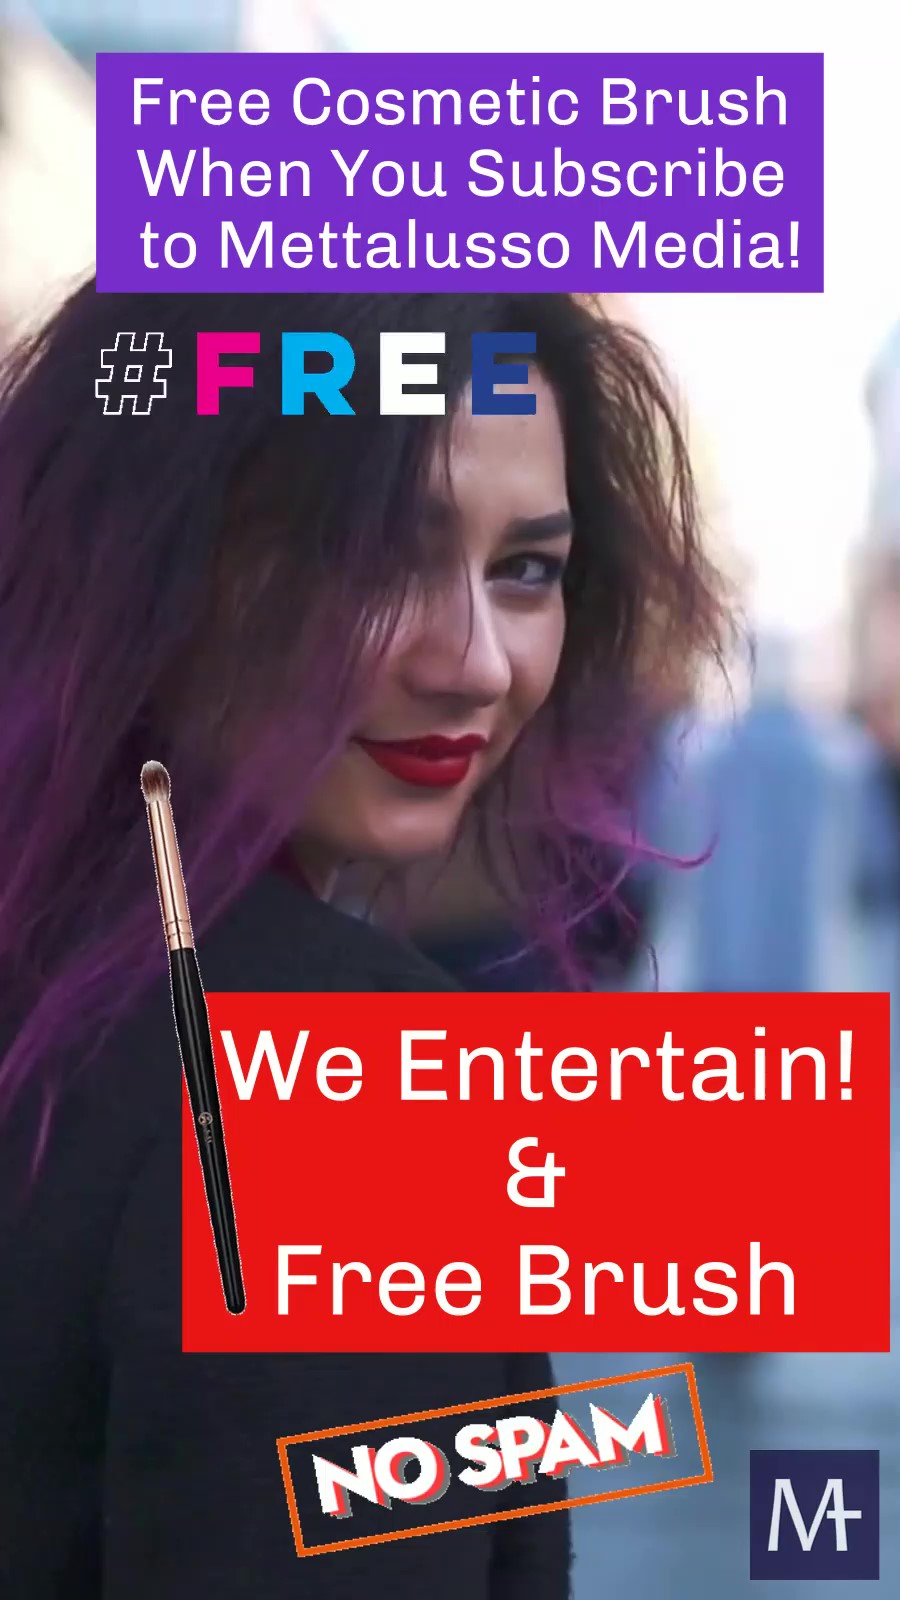 Free Makeup Brush with METTALUSSO MEDIA Subscription!